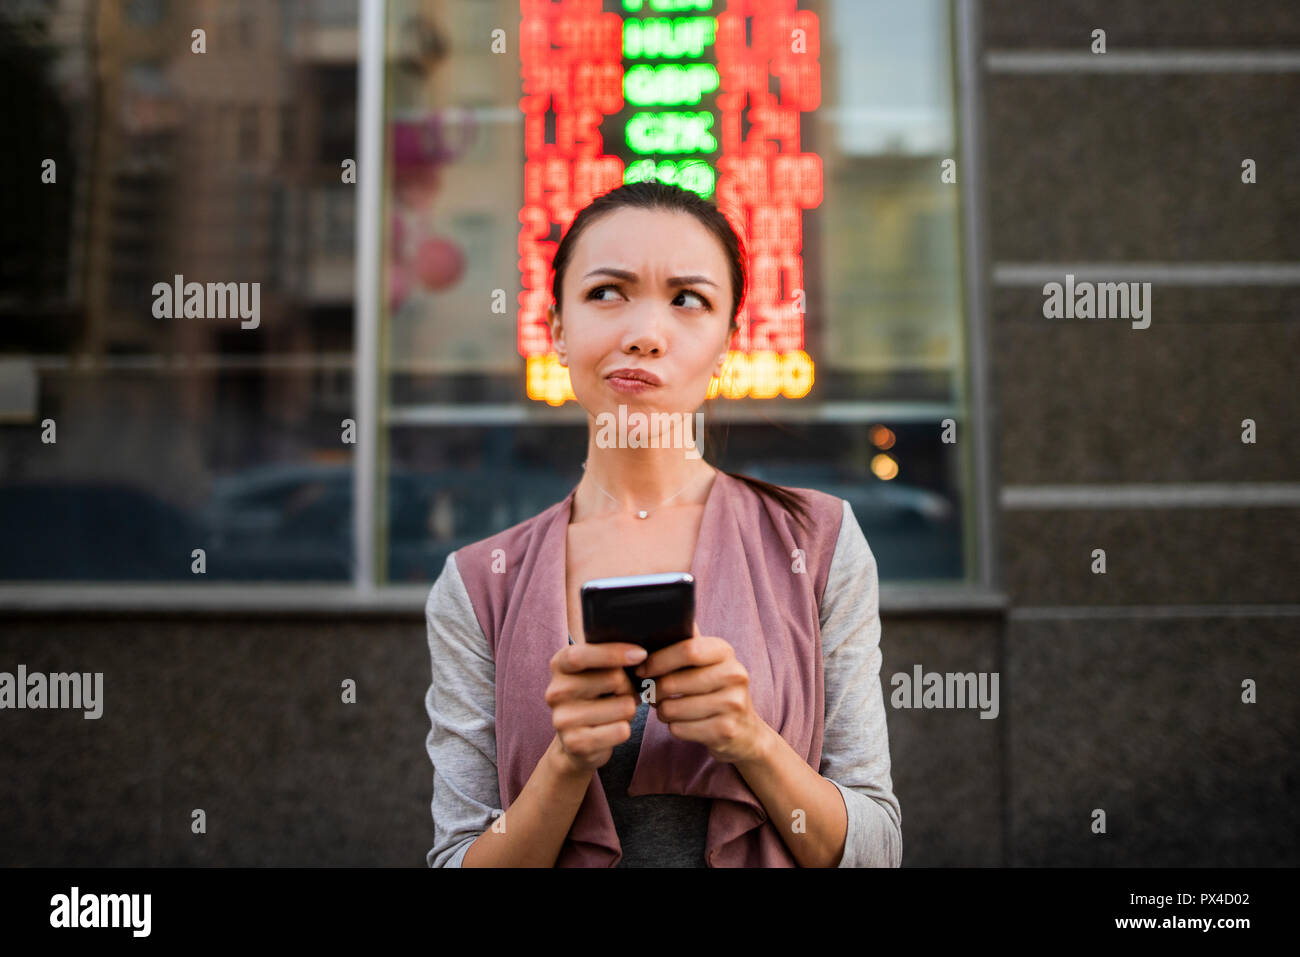 A young beautiful asian woman using an application in her smart phone to check currency exchange rates in front of an illuminated information board. Stock Photo